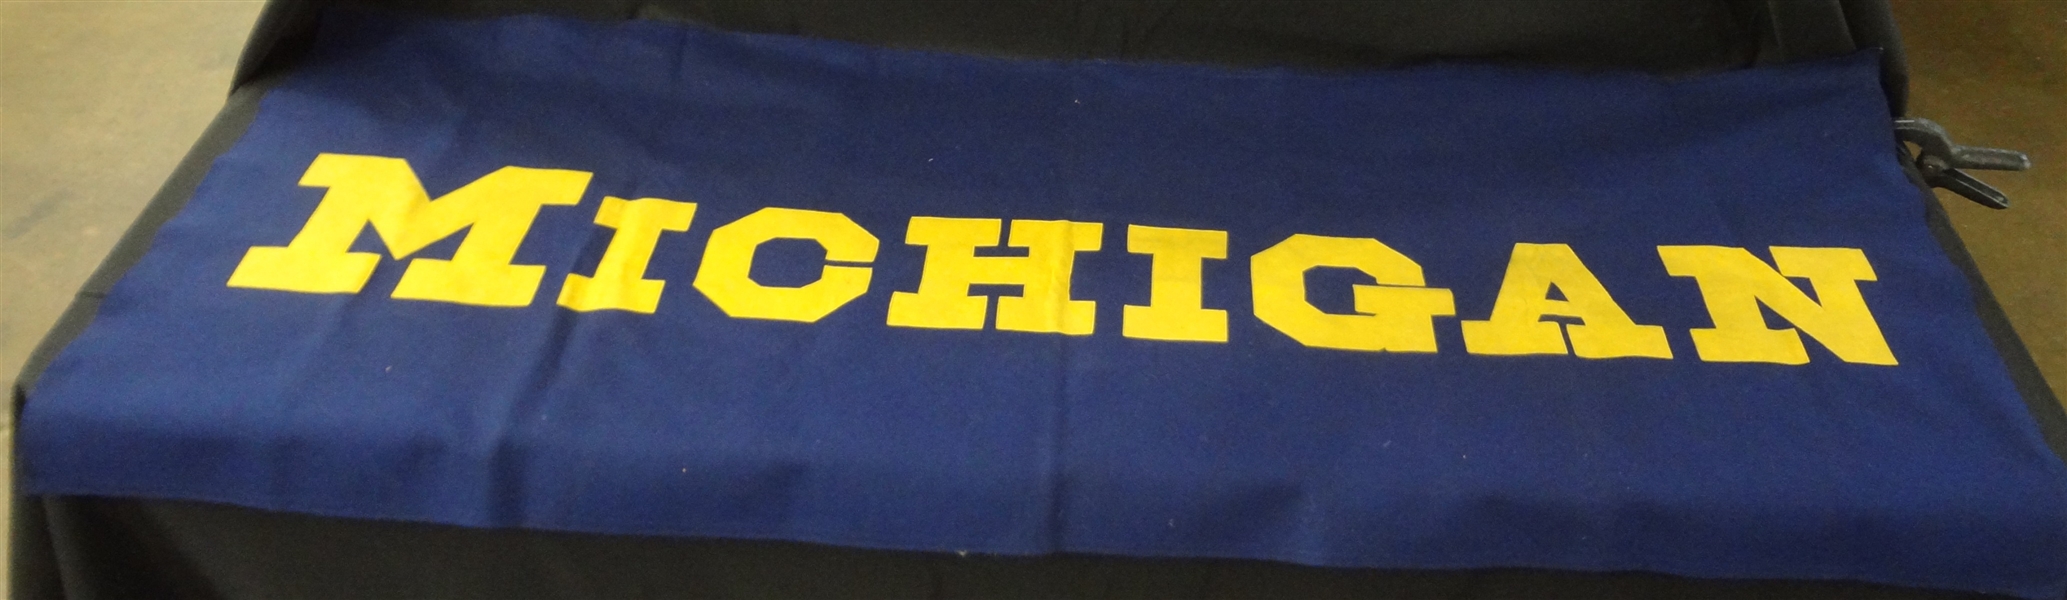 1916 University Michigan Blue and Gold Banner Provenance Team Manager John Robbins